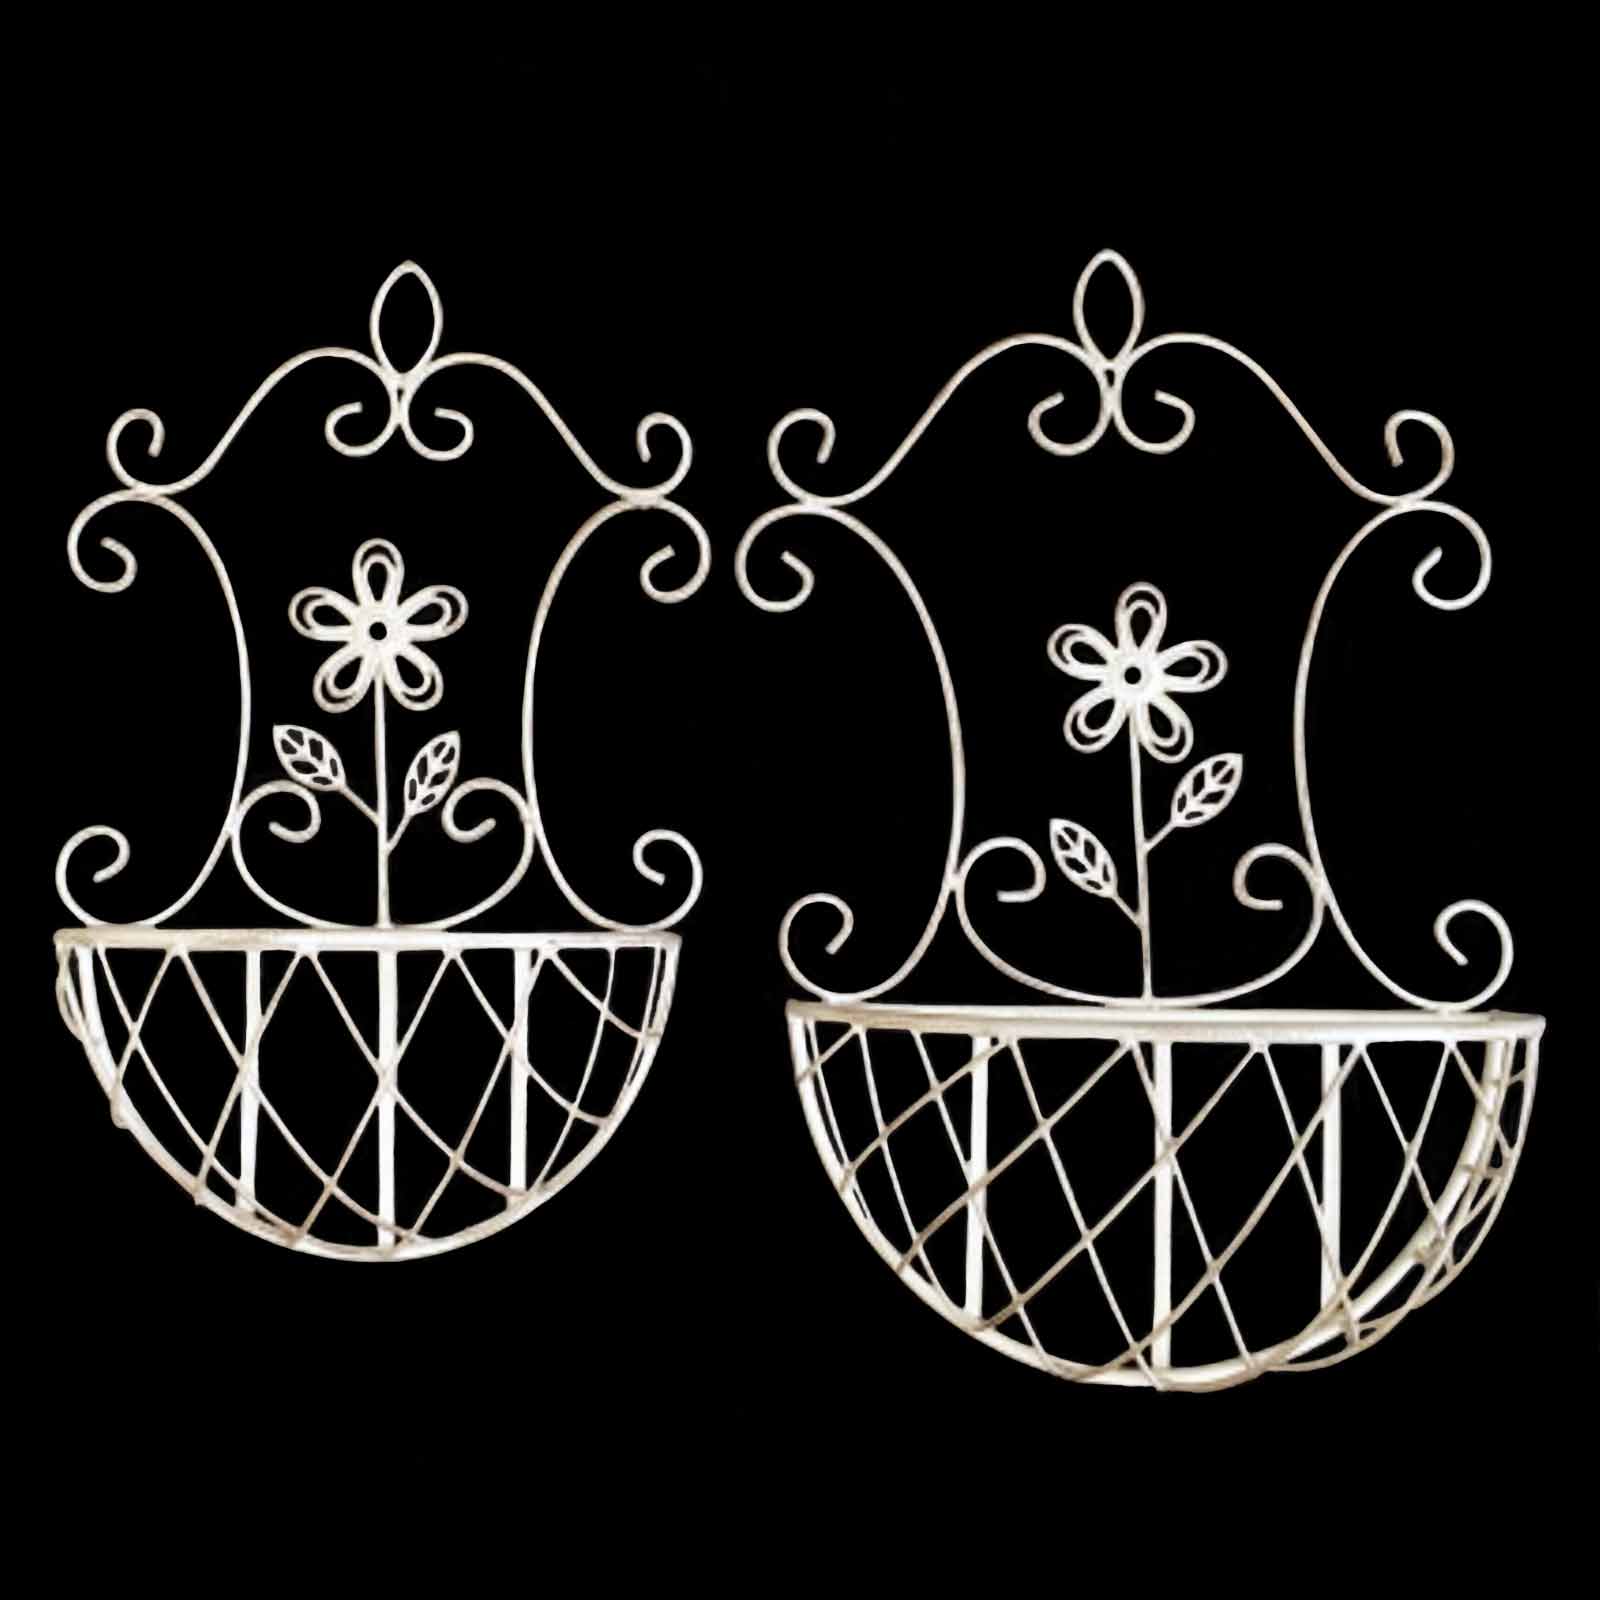 White Metal Ornamental Baskets Wall Planters - both large and small